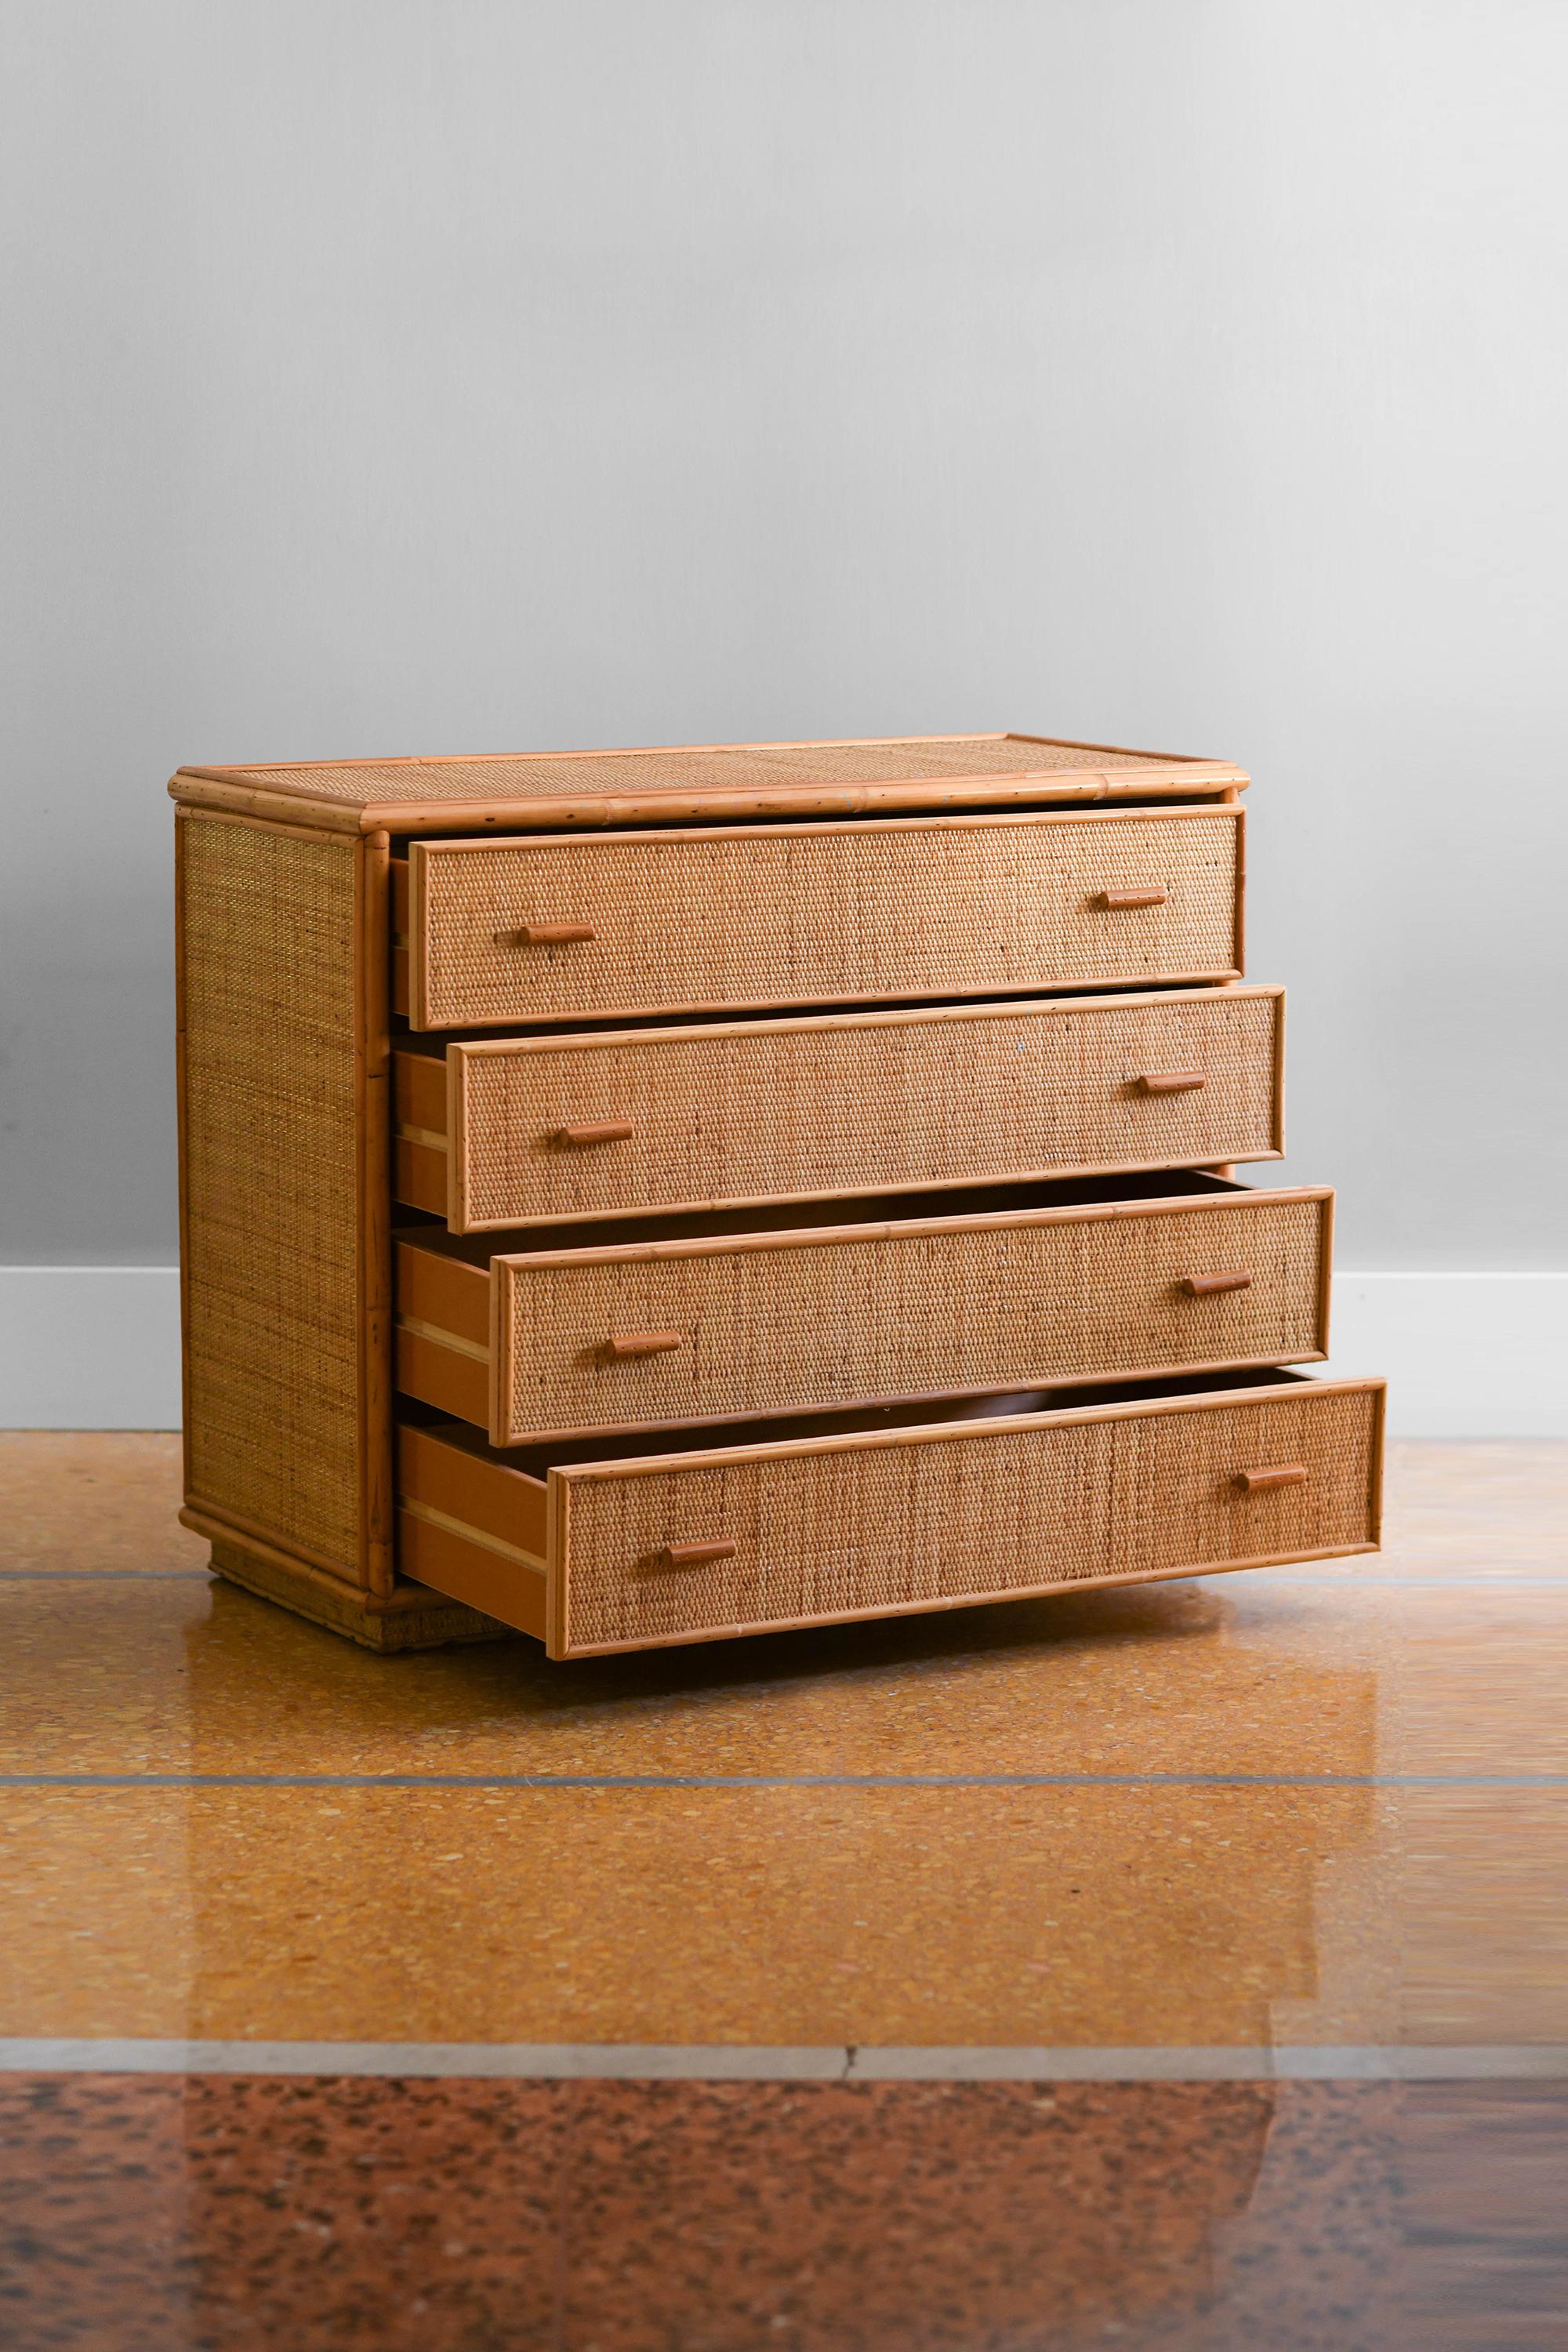 Wood Chest of drawers in bamboo and wicker, 1980.